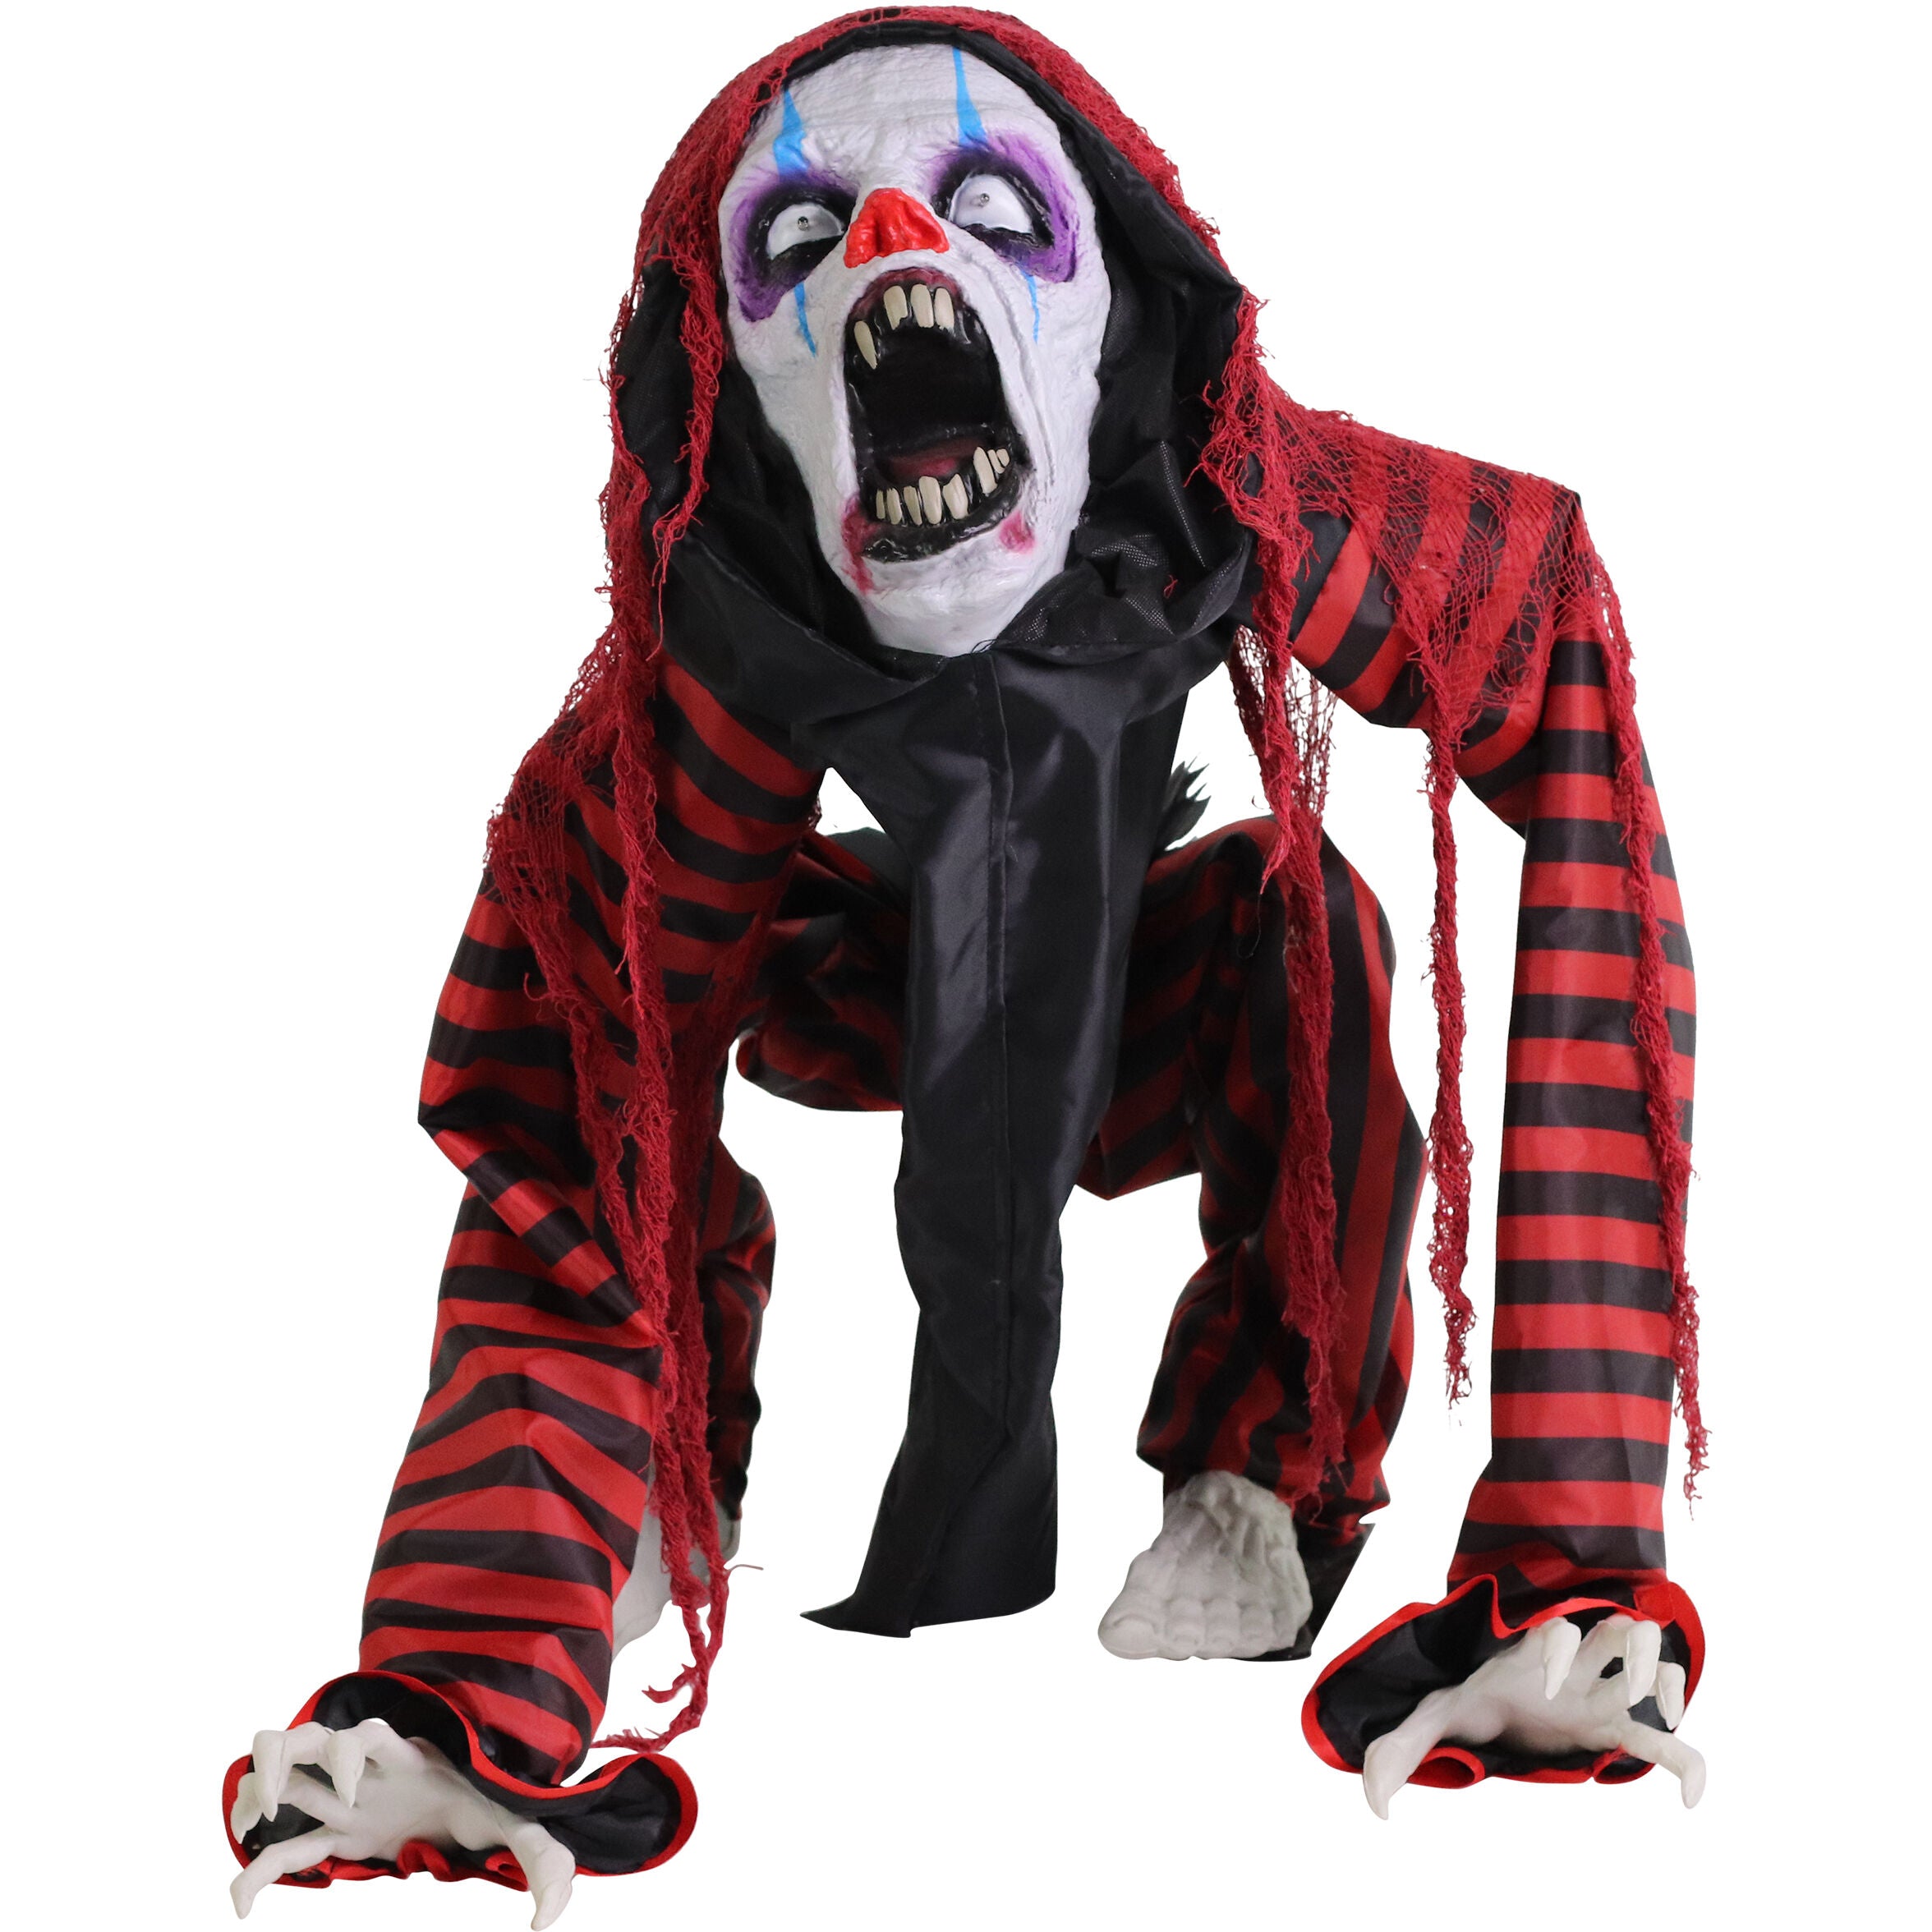 Haunted Hill Farm - Animatronic Squatting Clown Dog with Movement, Sounds, and Light-Up Eyes for Scary Halloween Decoration